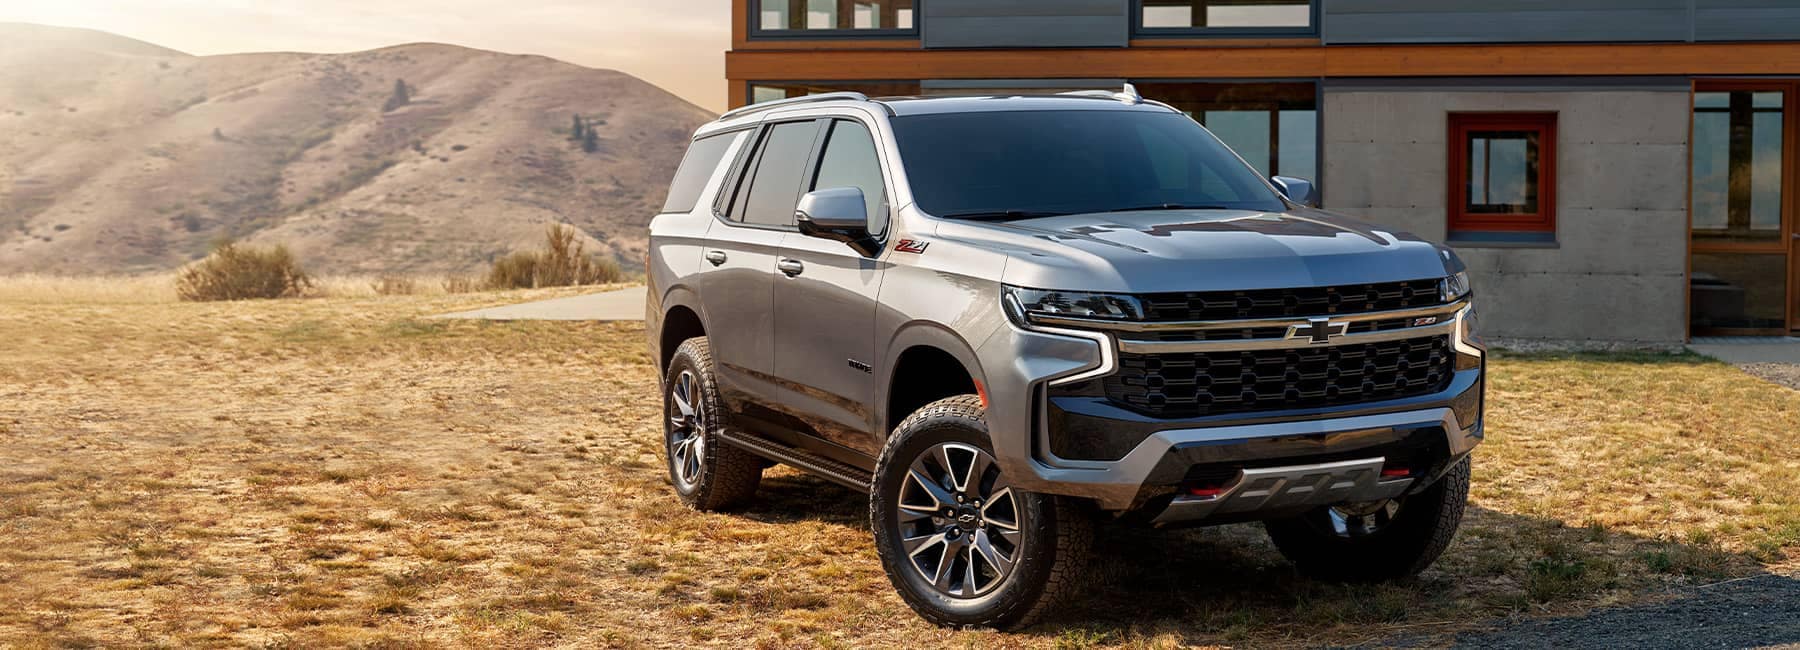 2022 Chevrolet Tahoe Z71 in Satin Steel Metallic Parked in Grass in Front of Mountains and a Home